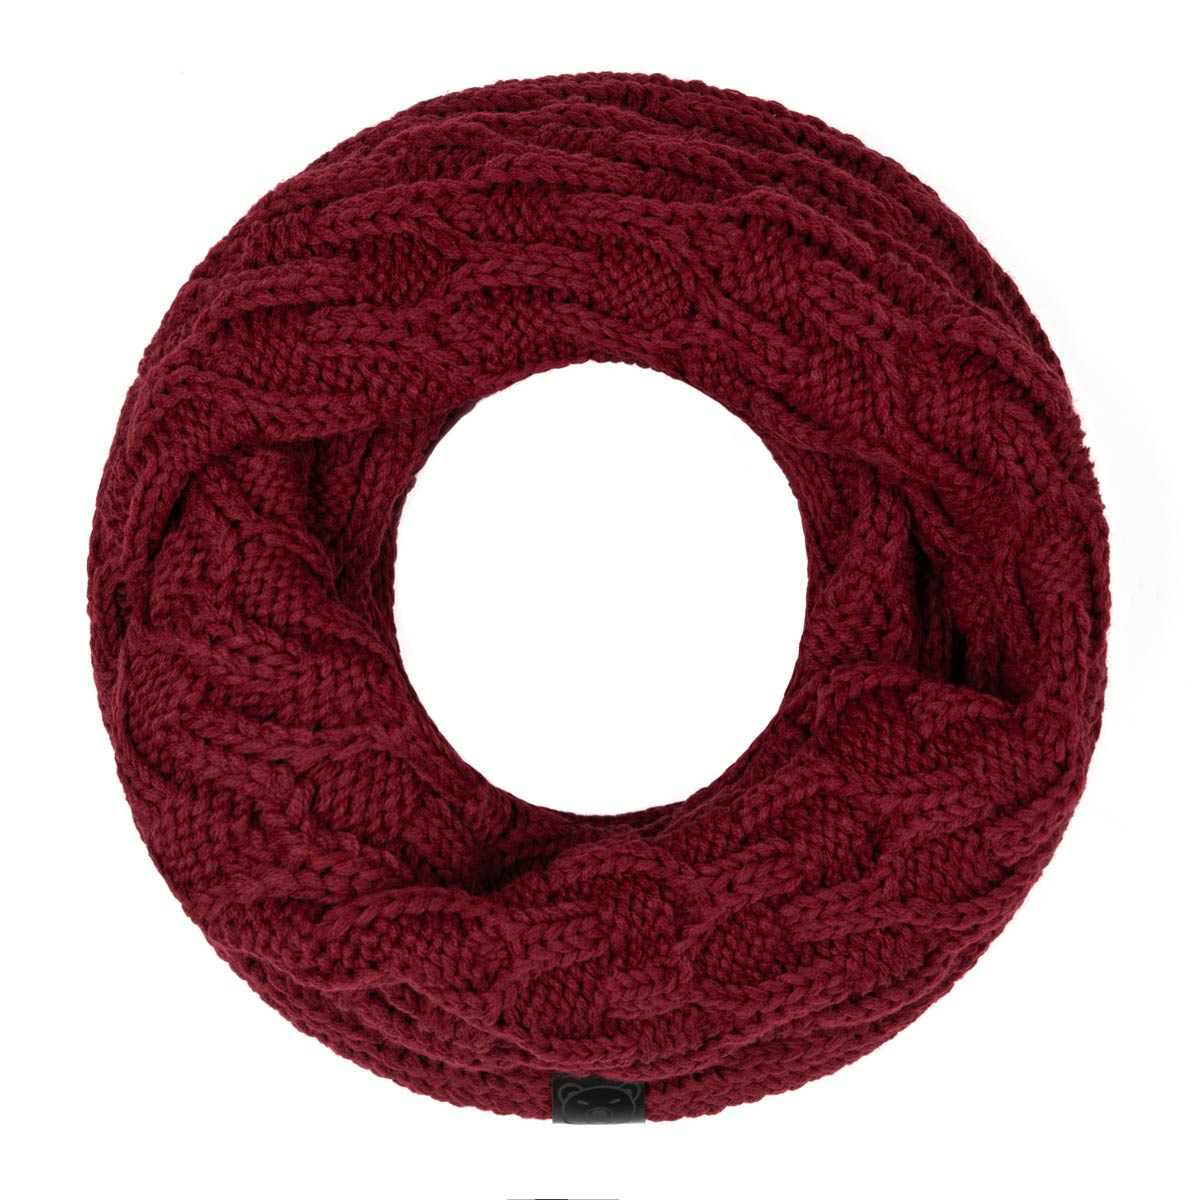 Snood-femme-bordeaux-fabrication-europeenne--AT-07073_F12-1--